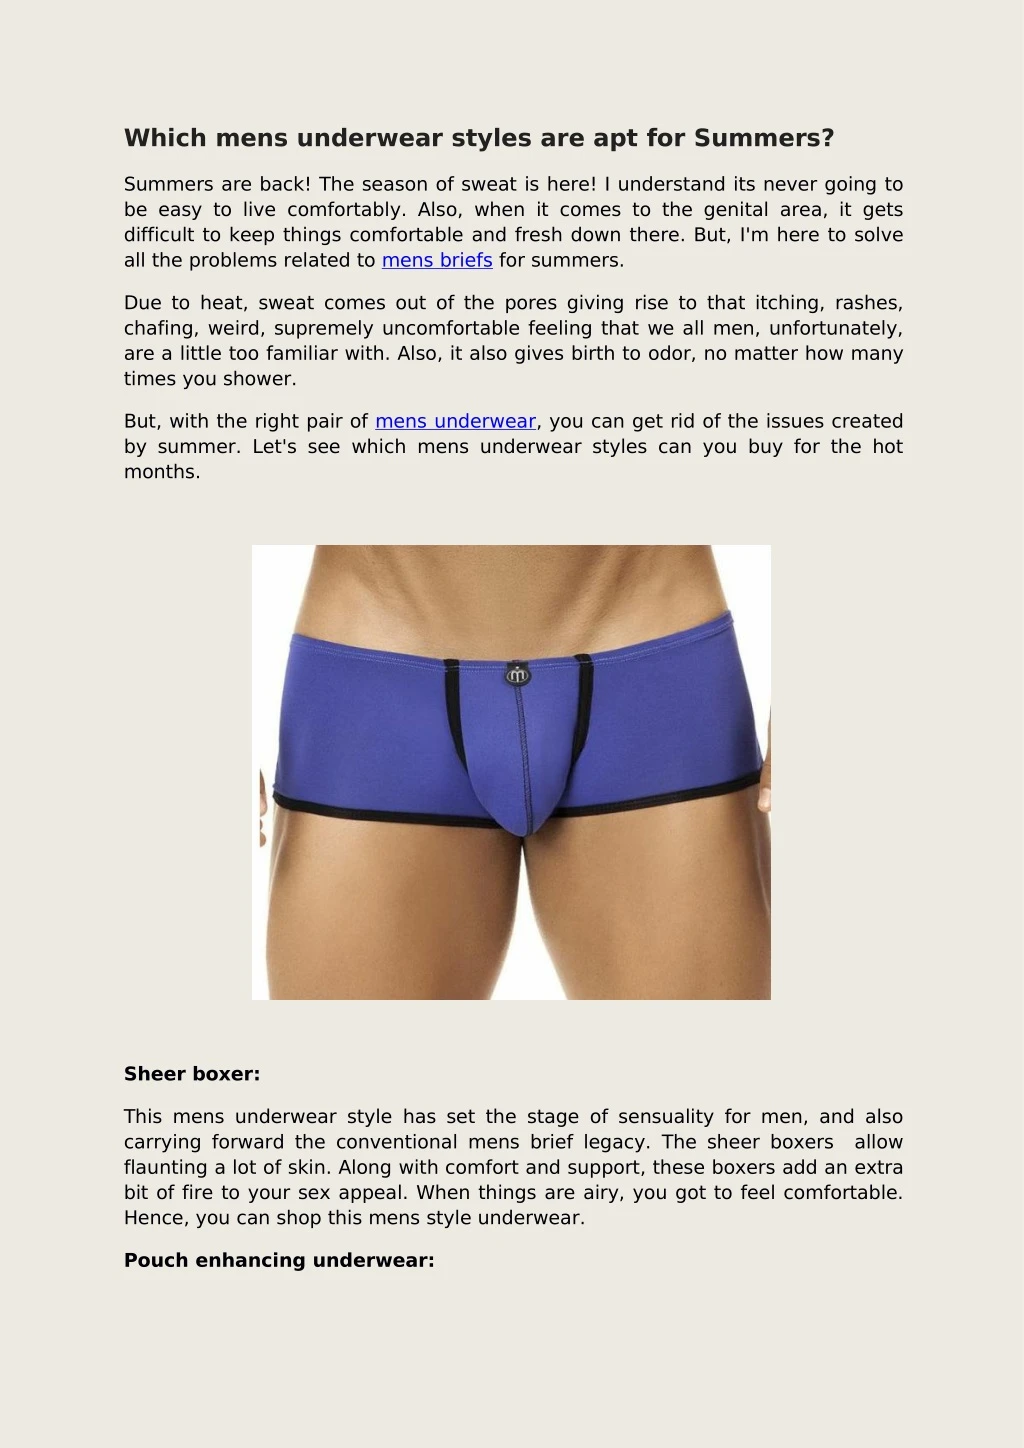 which mens underwear styles are apt for summers